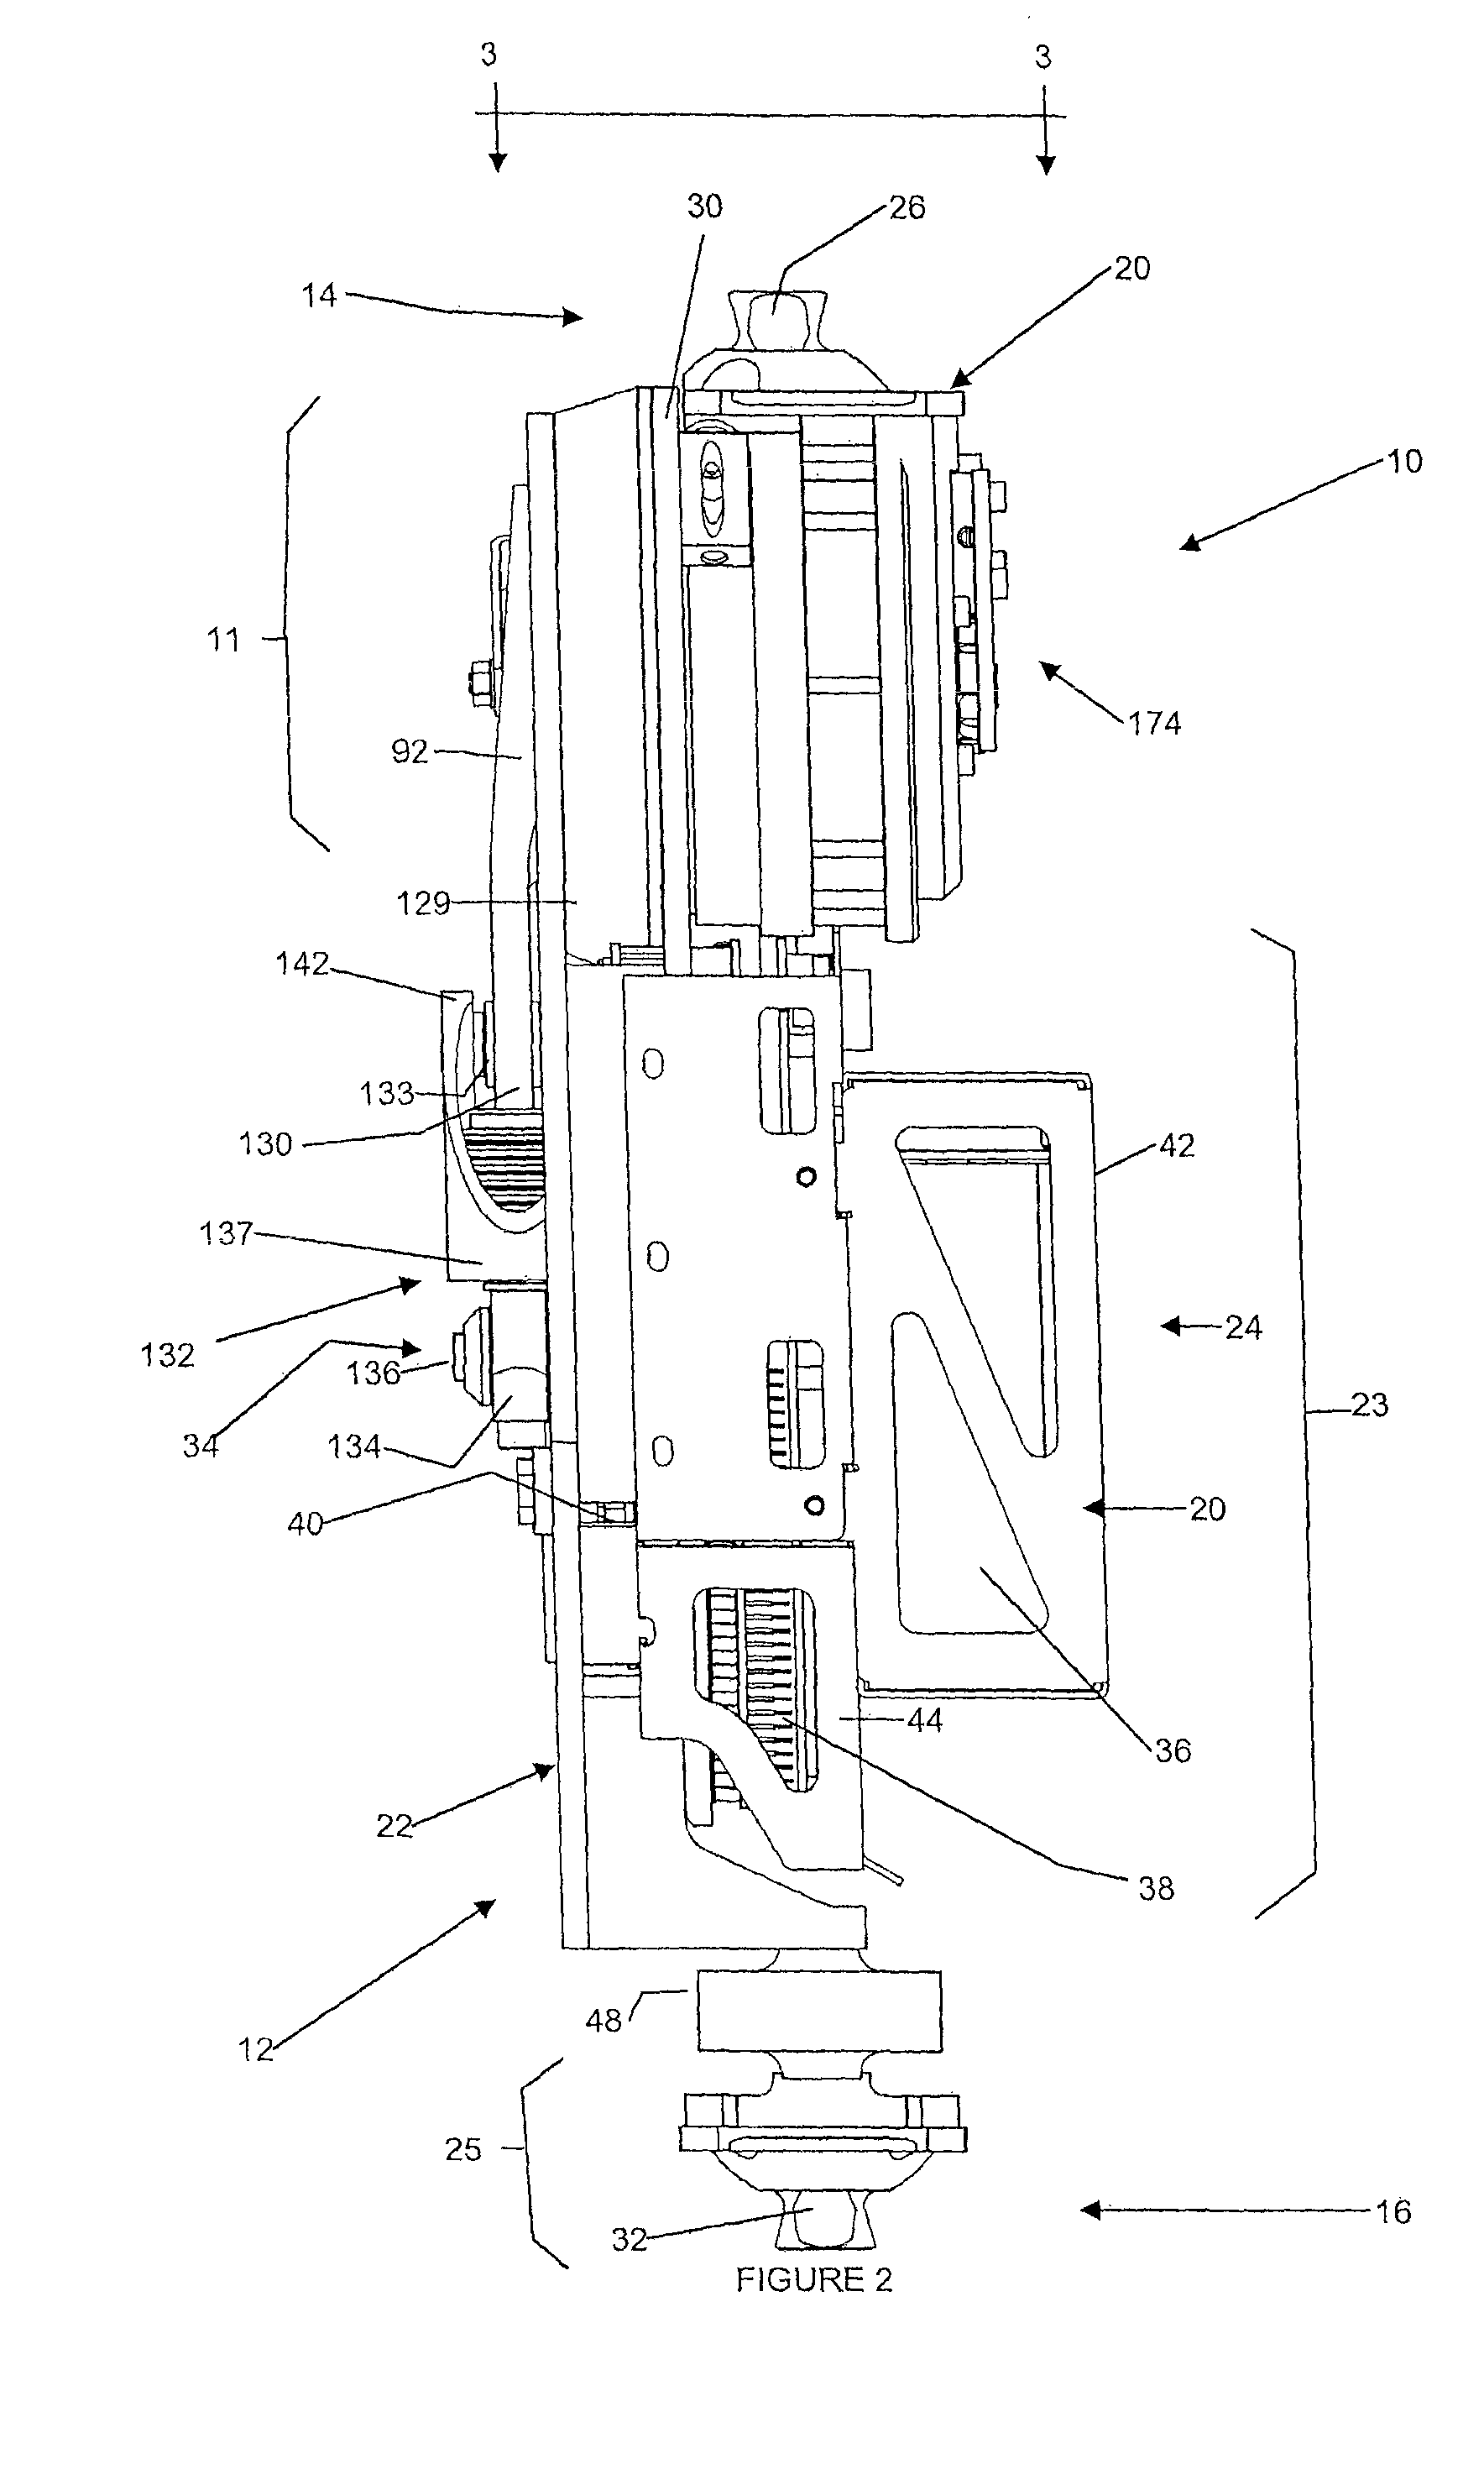 Joint actuation mechanism for a prosthetic and/or orthotic device having a compliant transmission